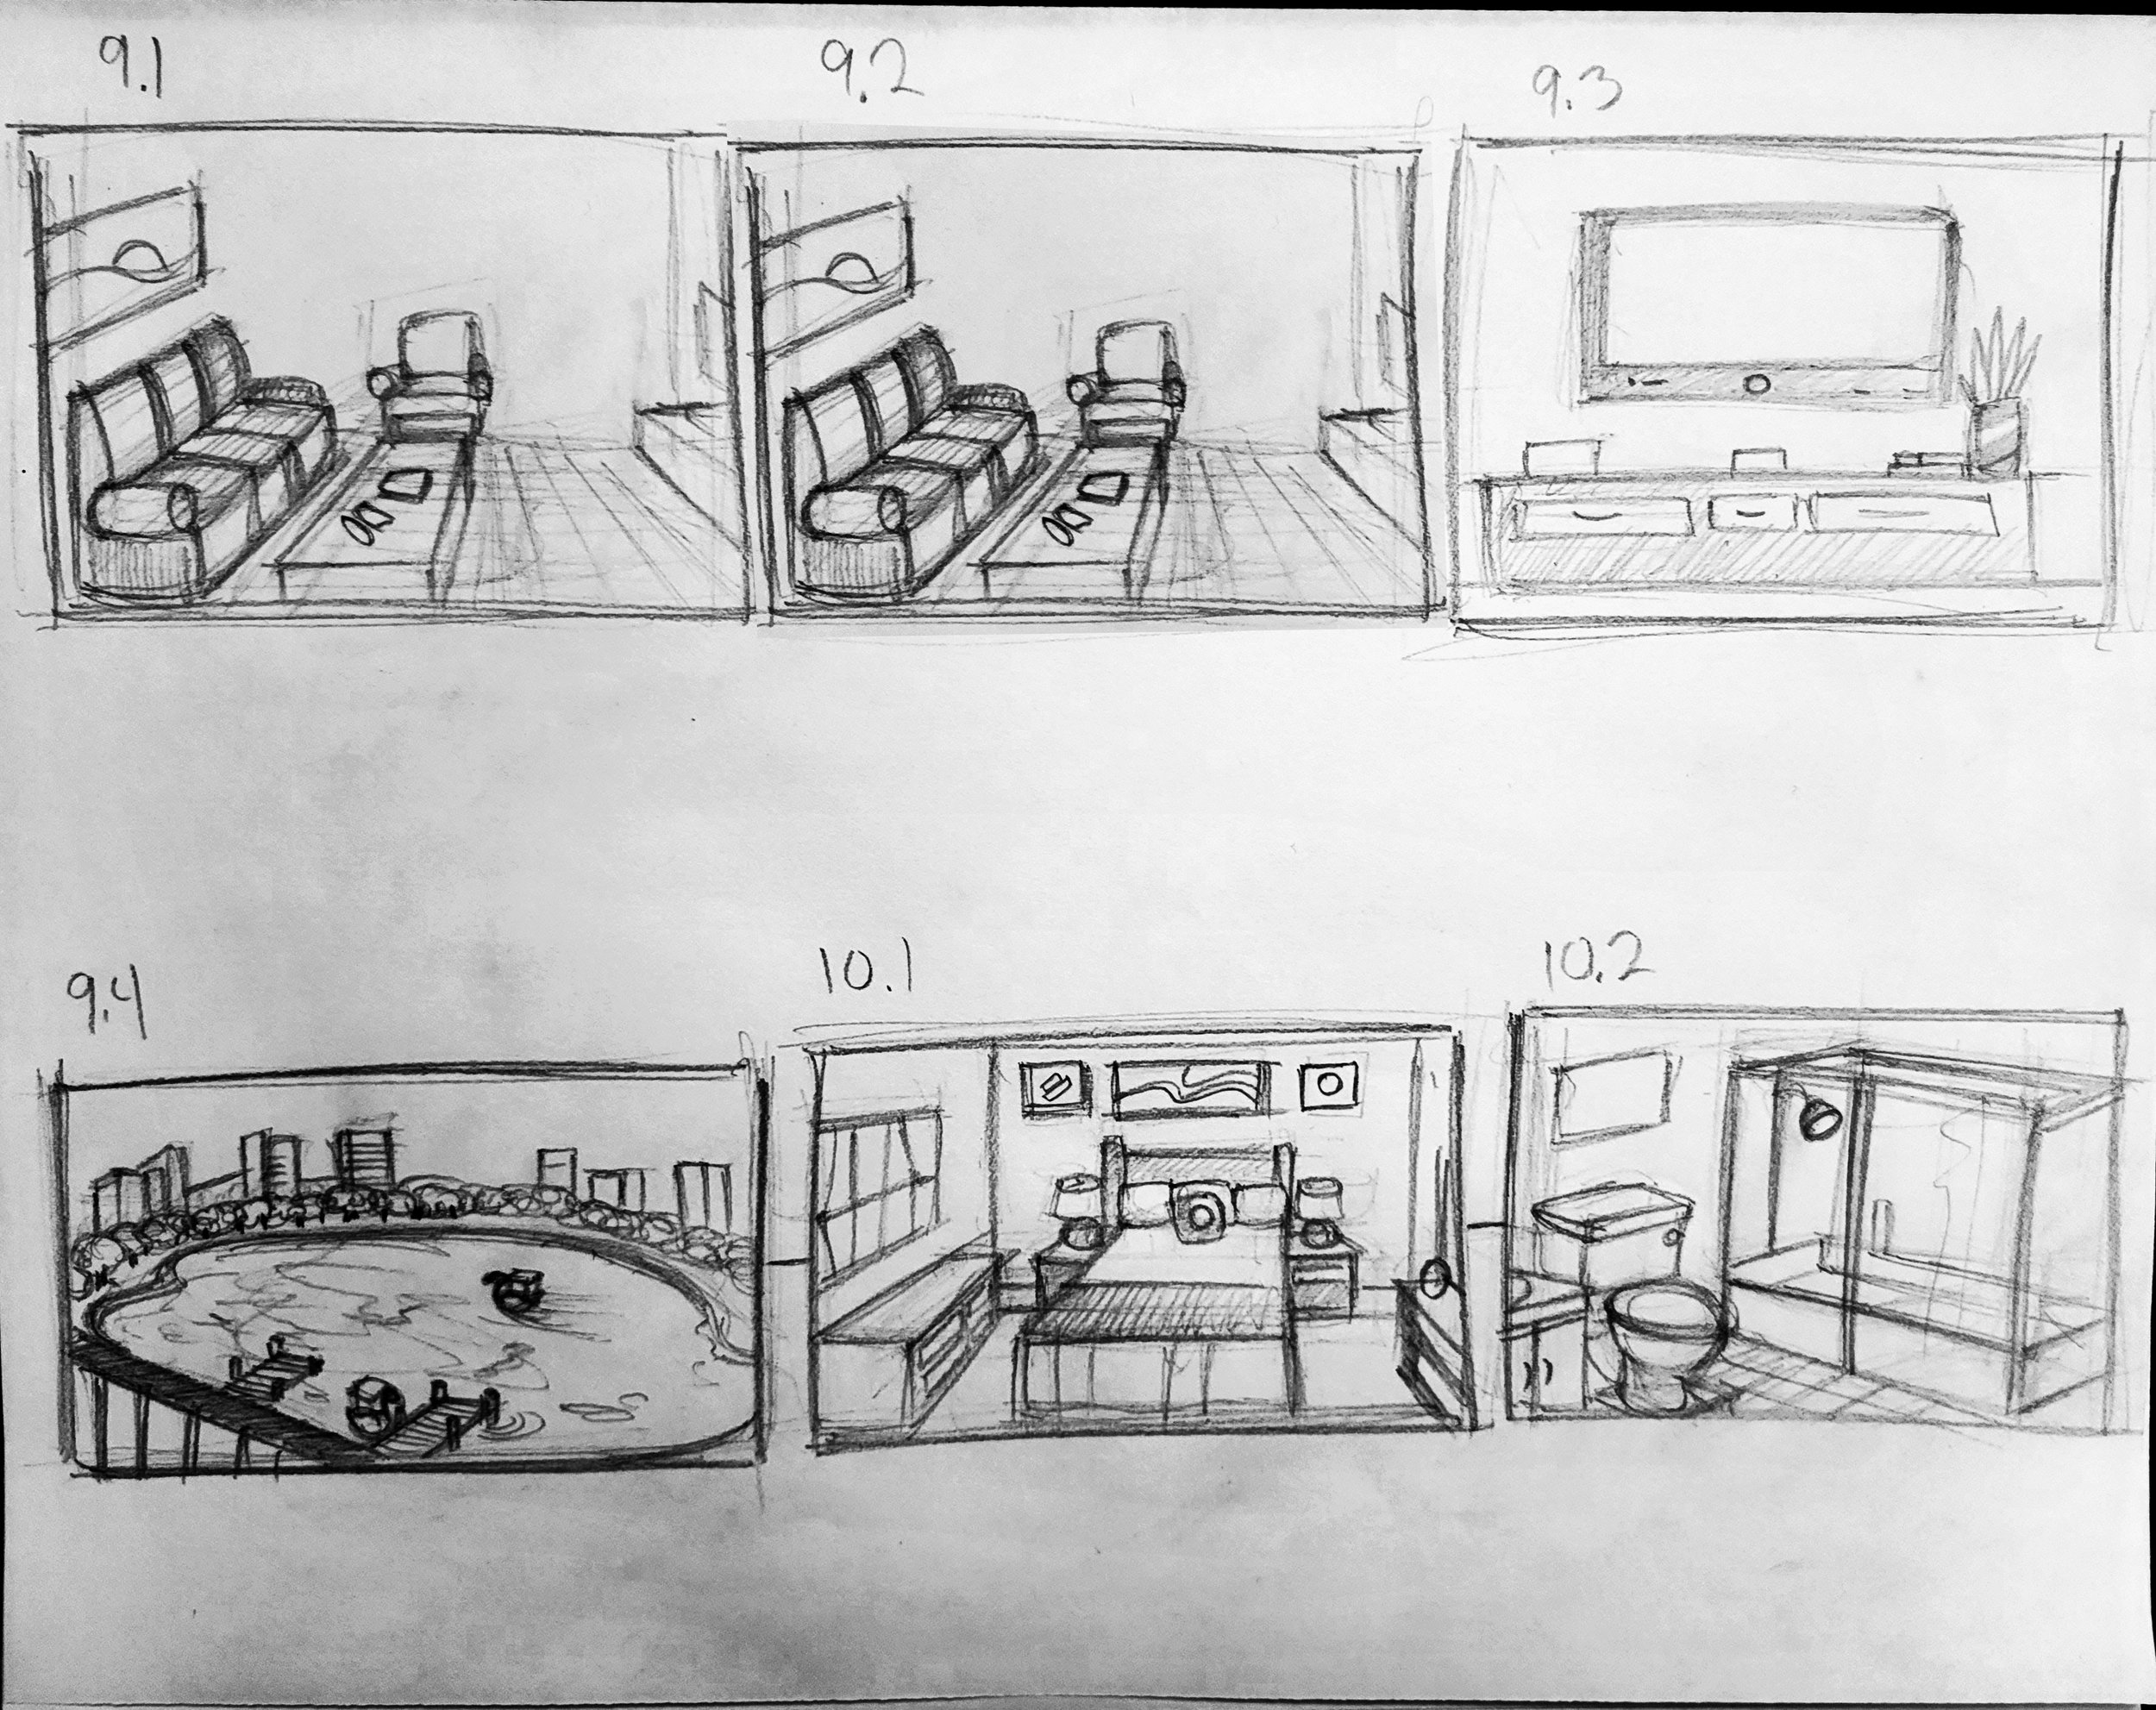 WR_Real_Suite_Eats_S1_E2_StoryBoard_Frames_9_1_to_10_2.jpg